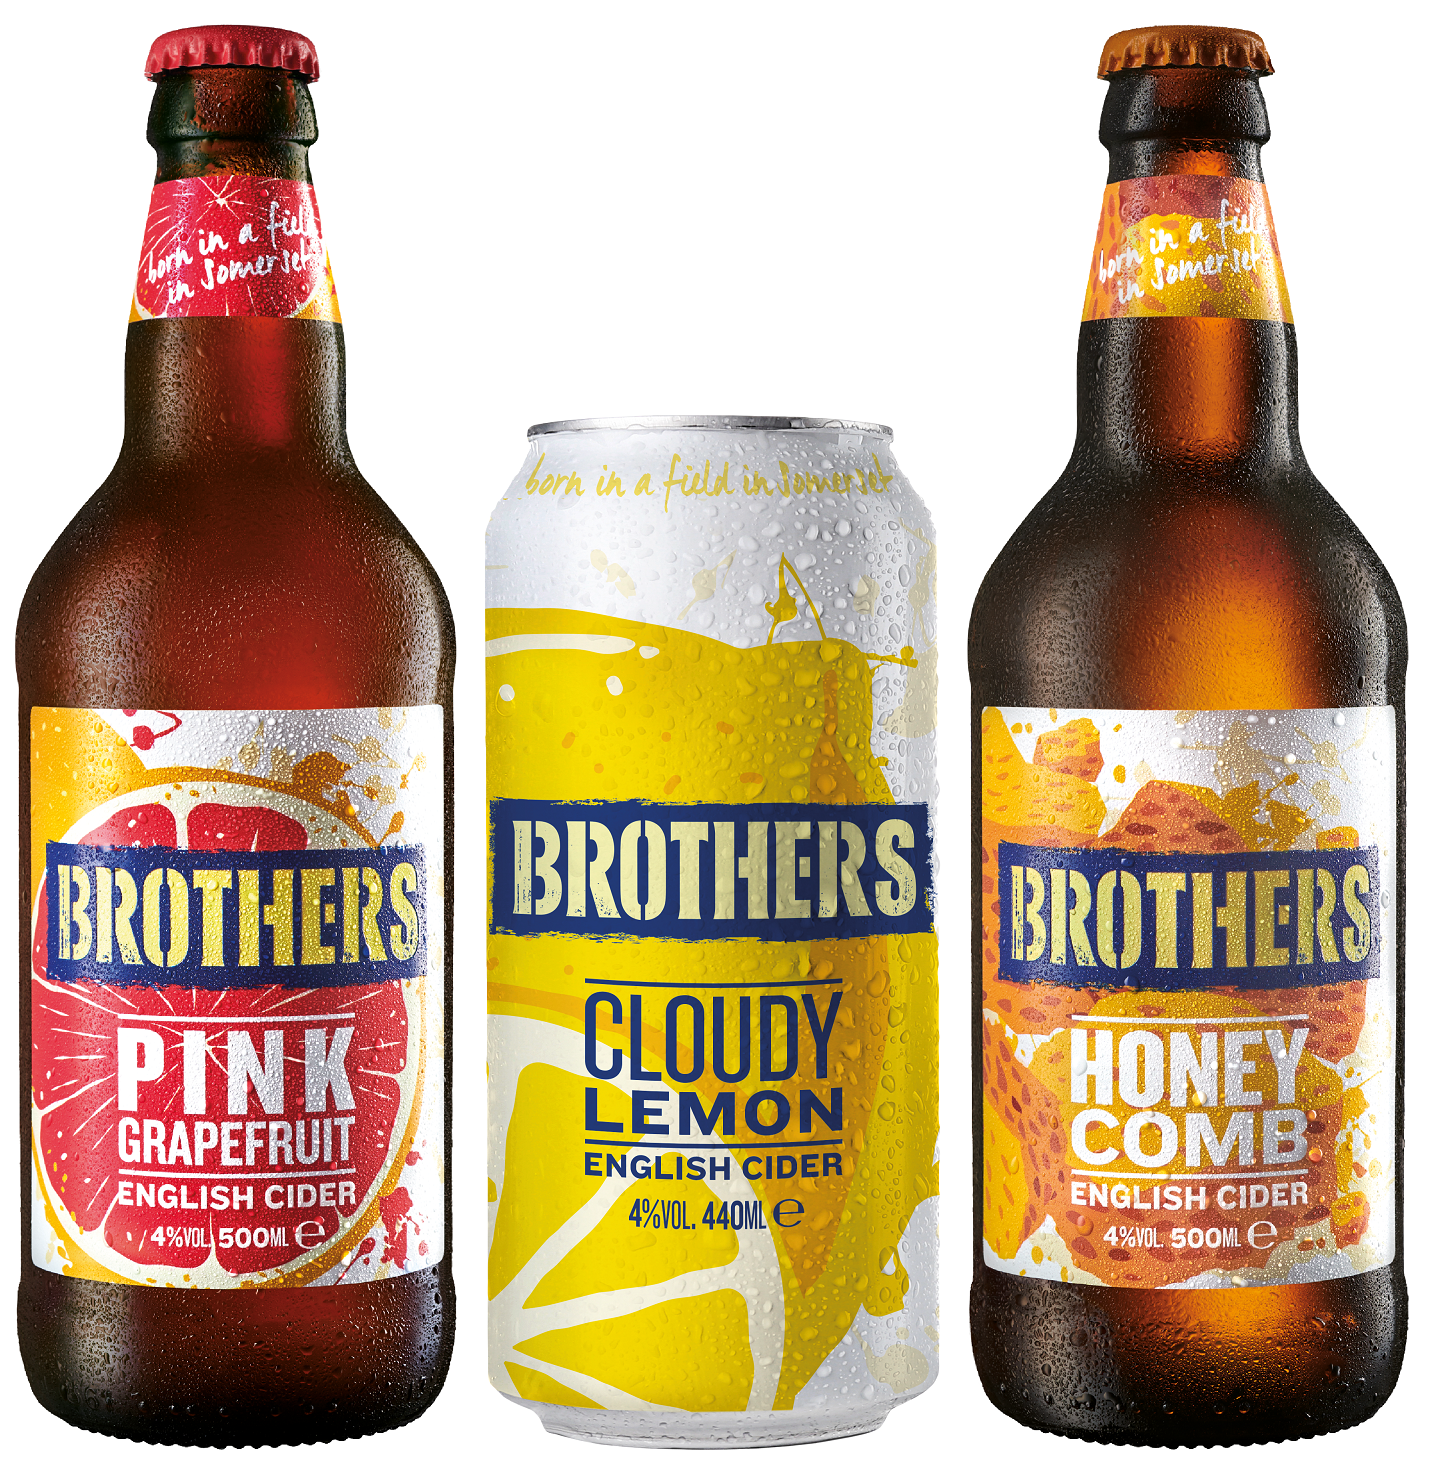 Brothers Cider launches two new flavours and brings back Cloudy Lemon